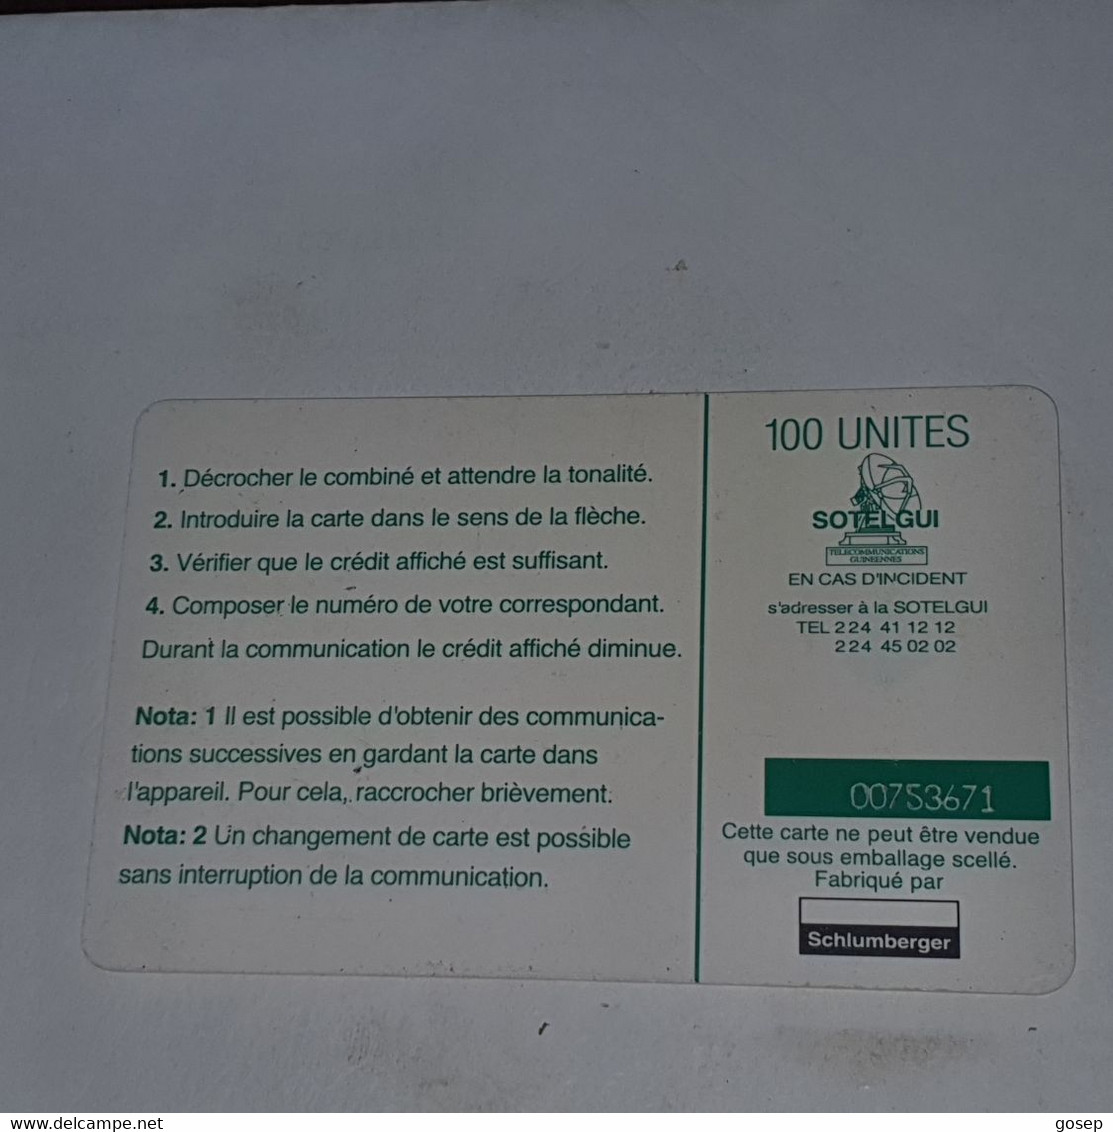 Guinea-(GN-SOT-0014A/1)-Lefas Et Paniers-(14)(100units)(00753671)-used Card+1card Prepiad/gift Free - Guinee